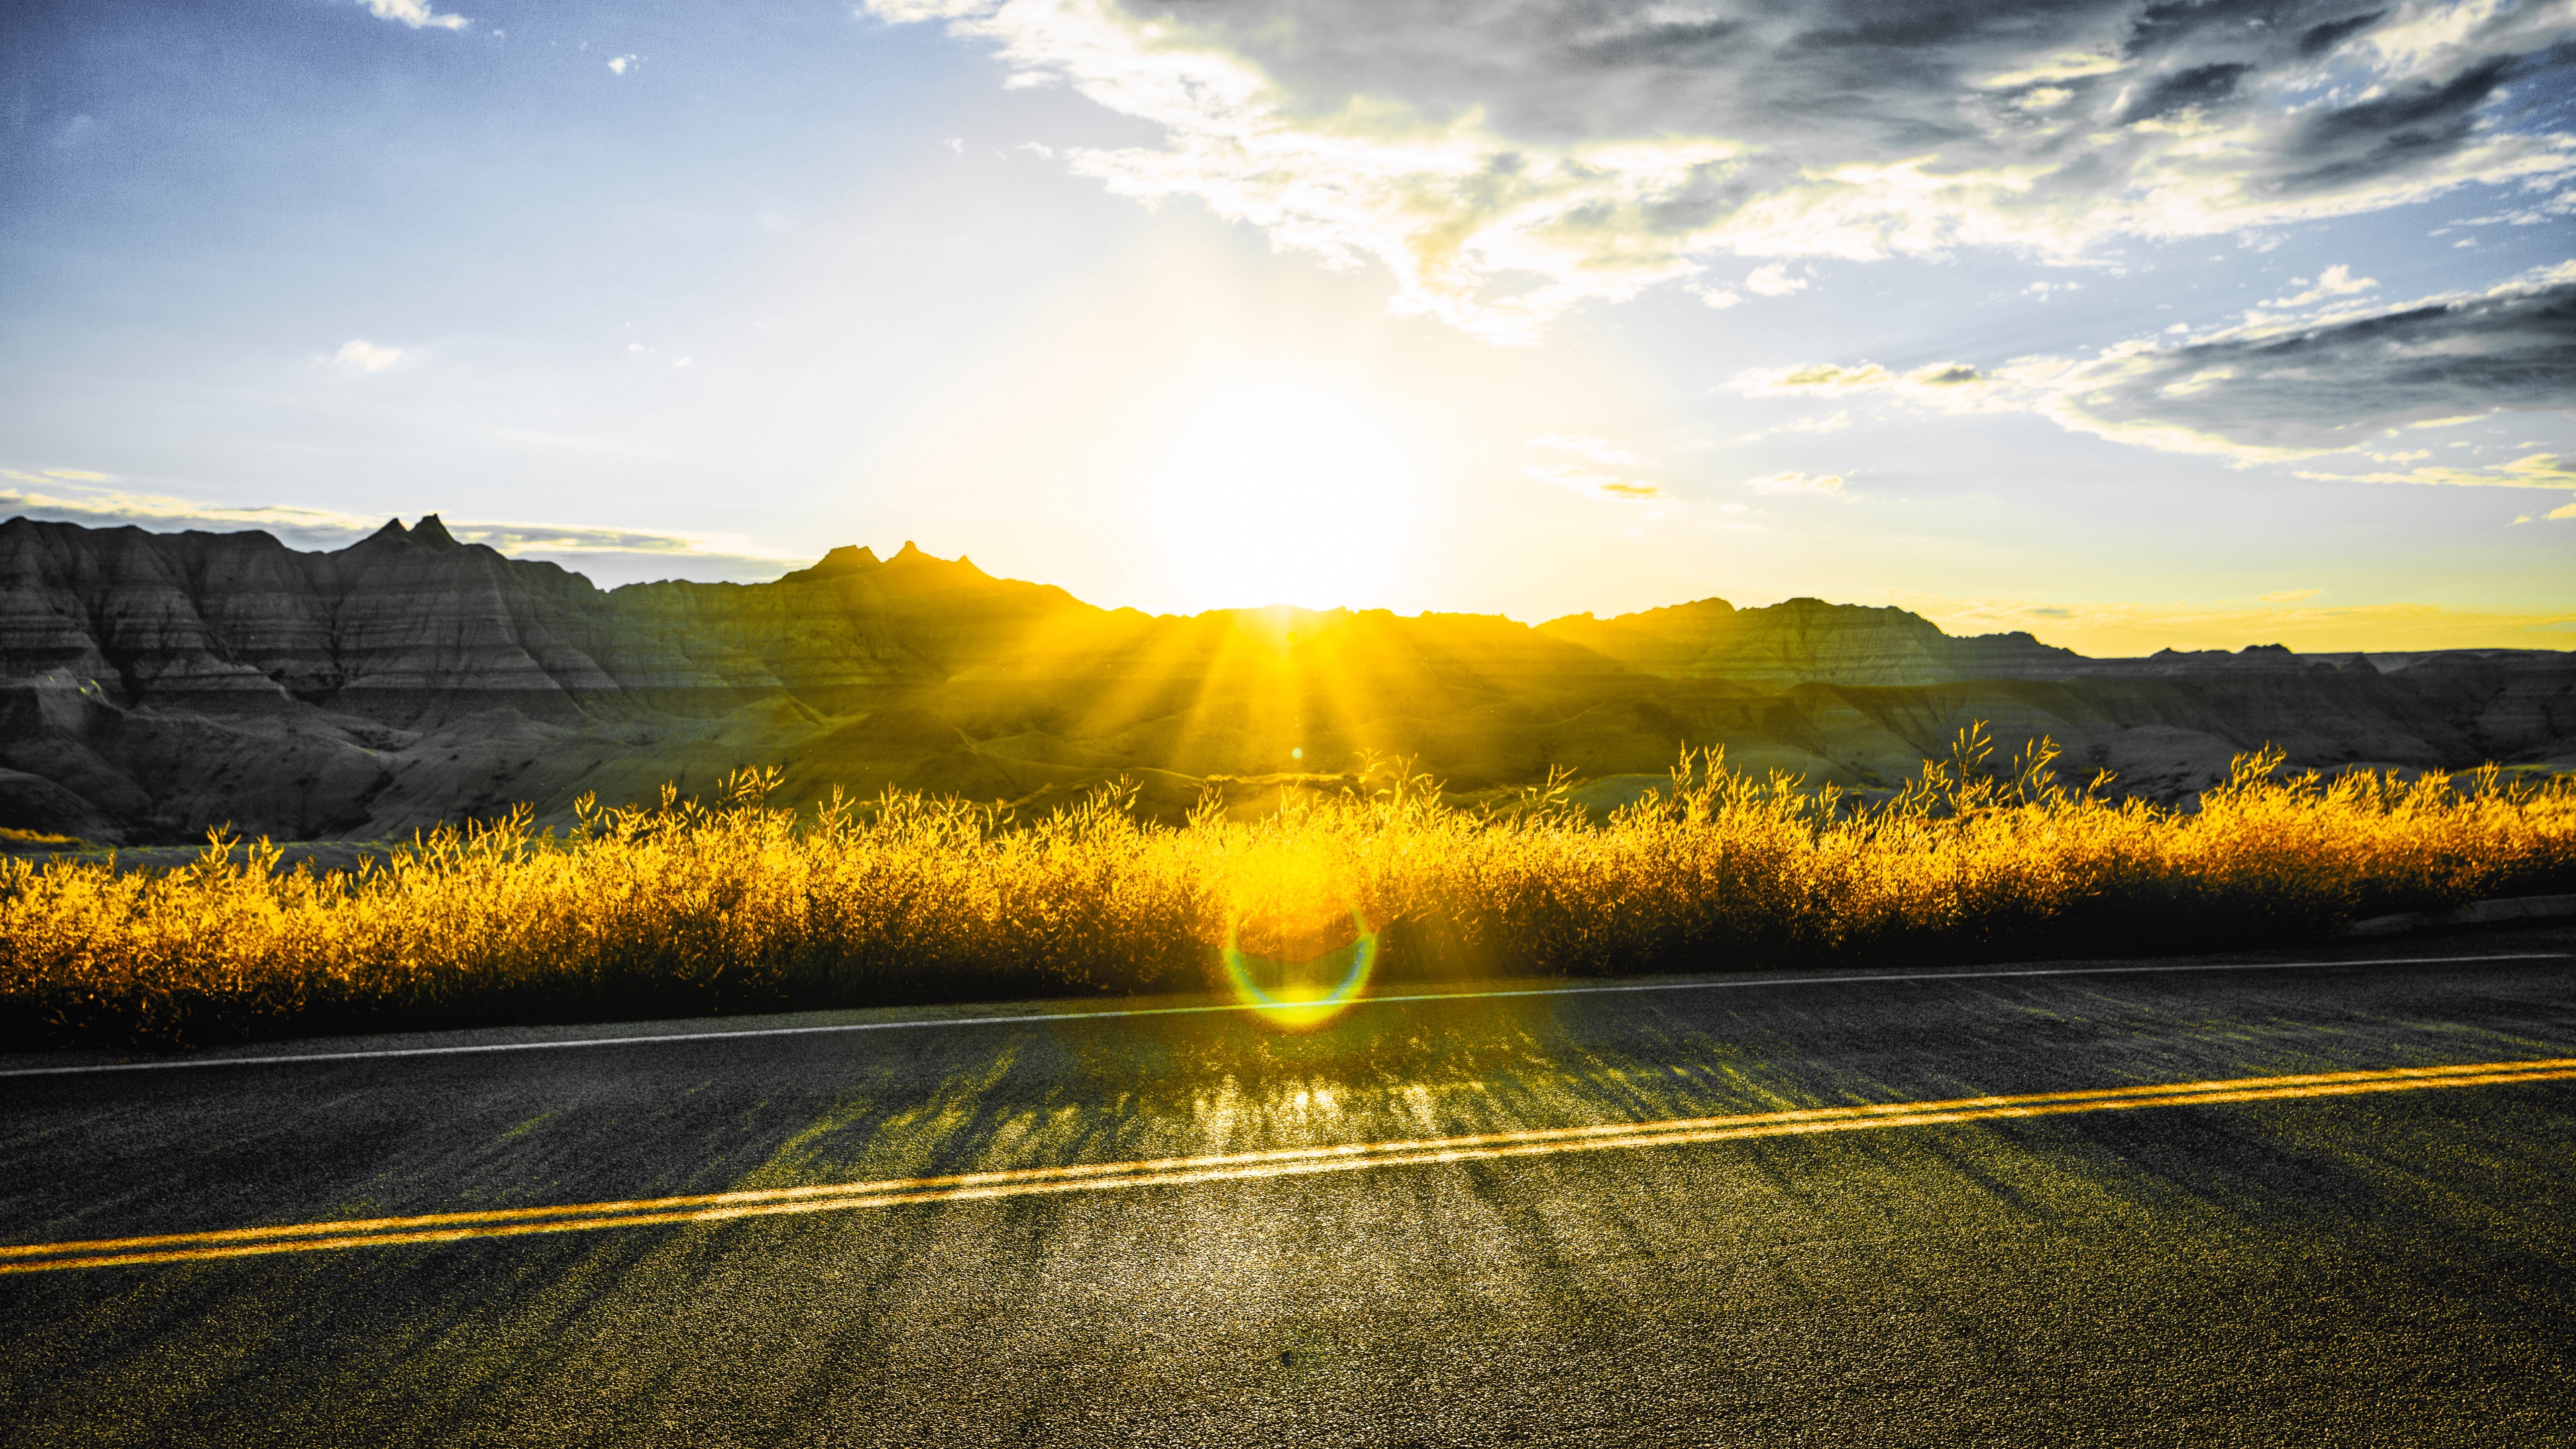 Wallpaper Road, Mountains, Sun, Glare, Sunny - God's Approval Is All That Matters - HD Wallpaper 